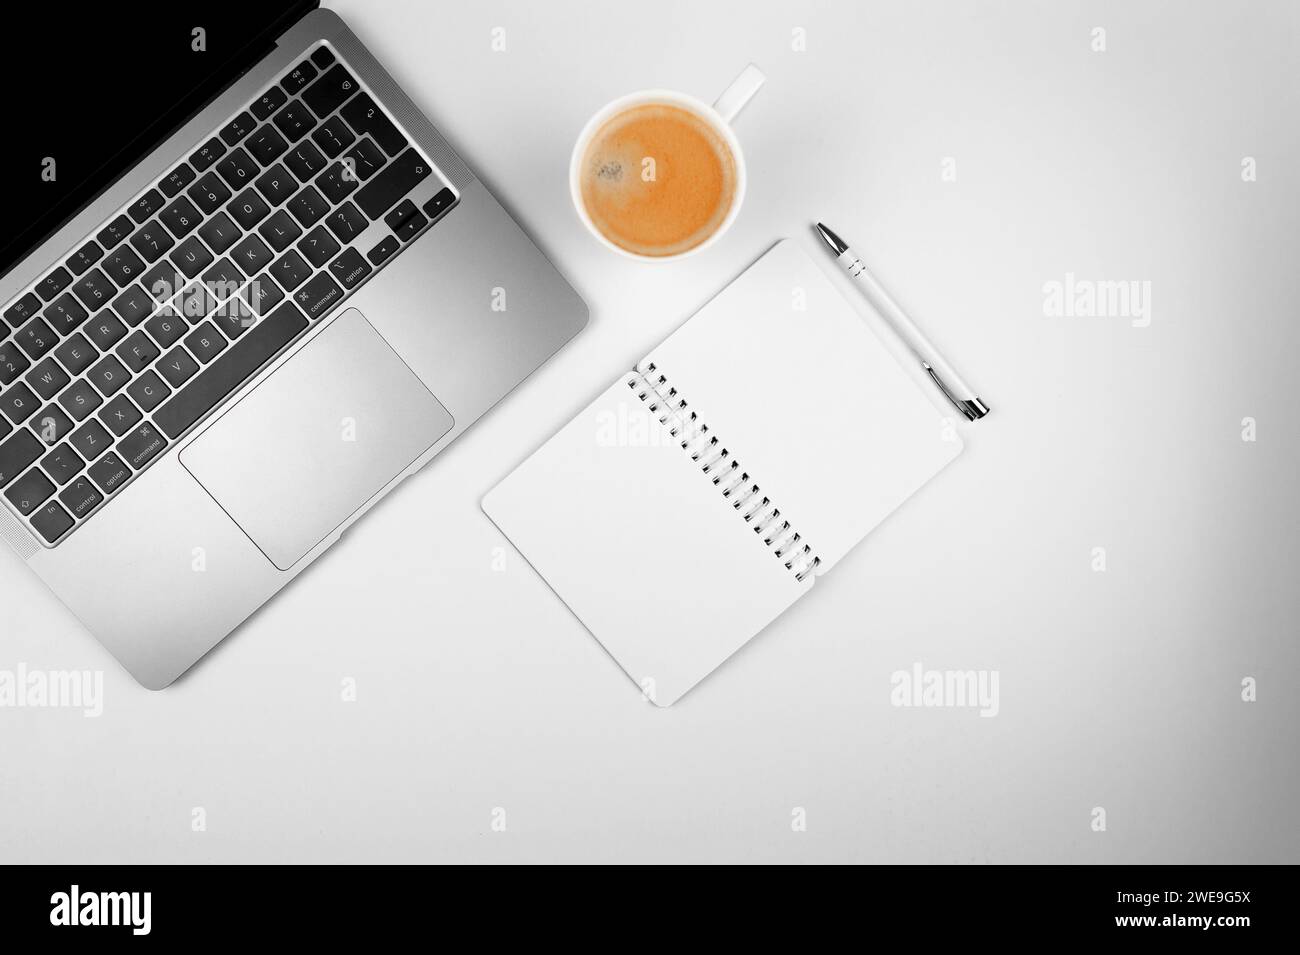 Top view of grey laptop computer on white background. Notebook, pen and coffee cup flat lay, copy space. Stock Photo